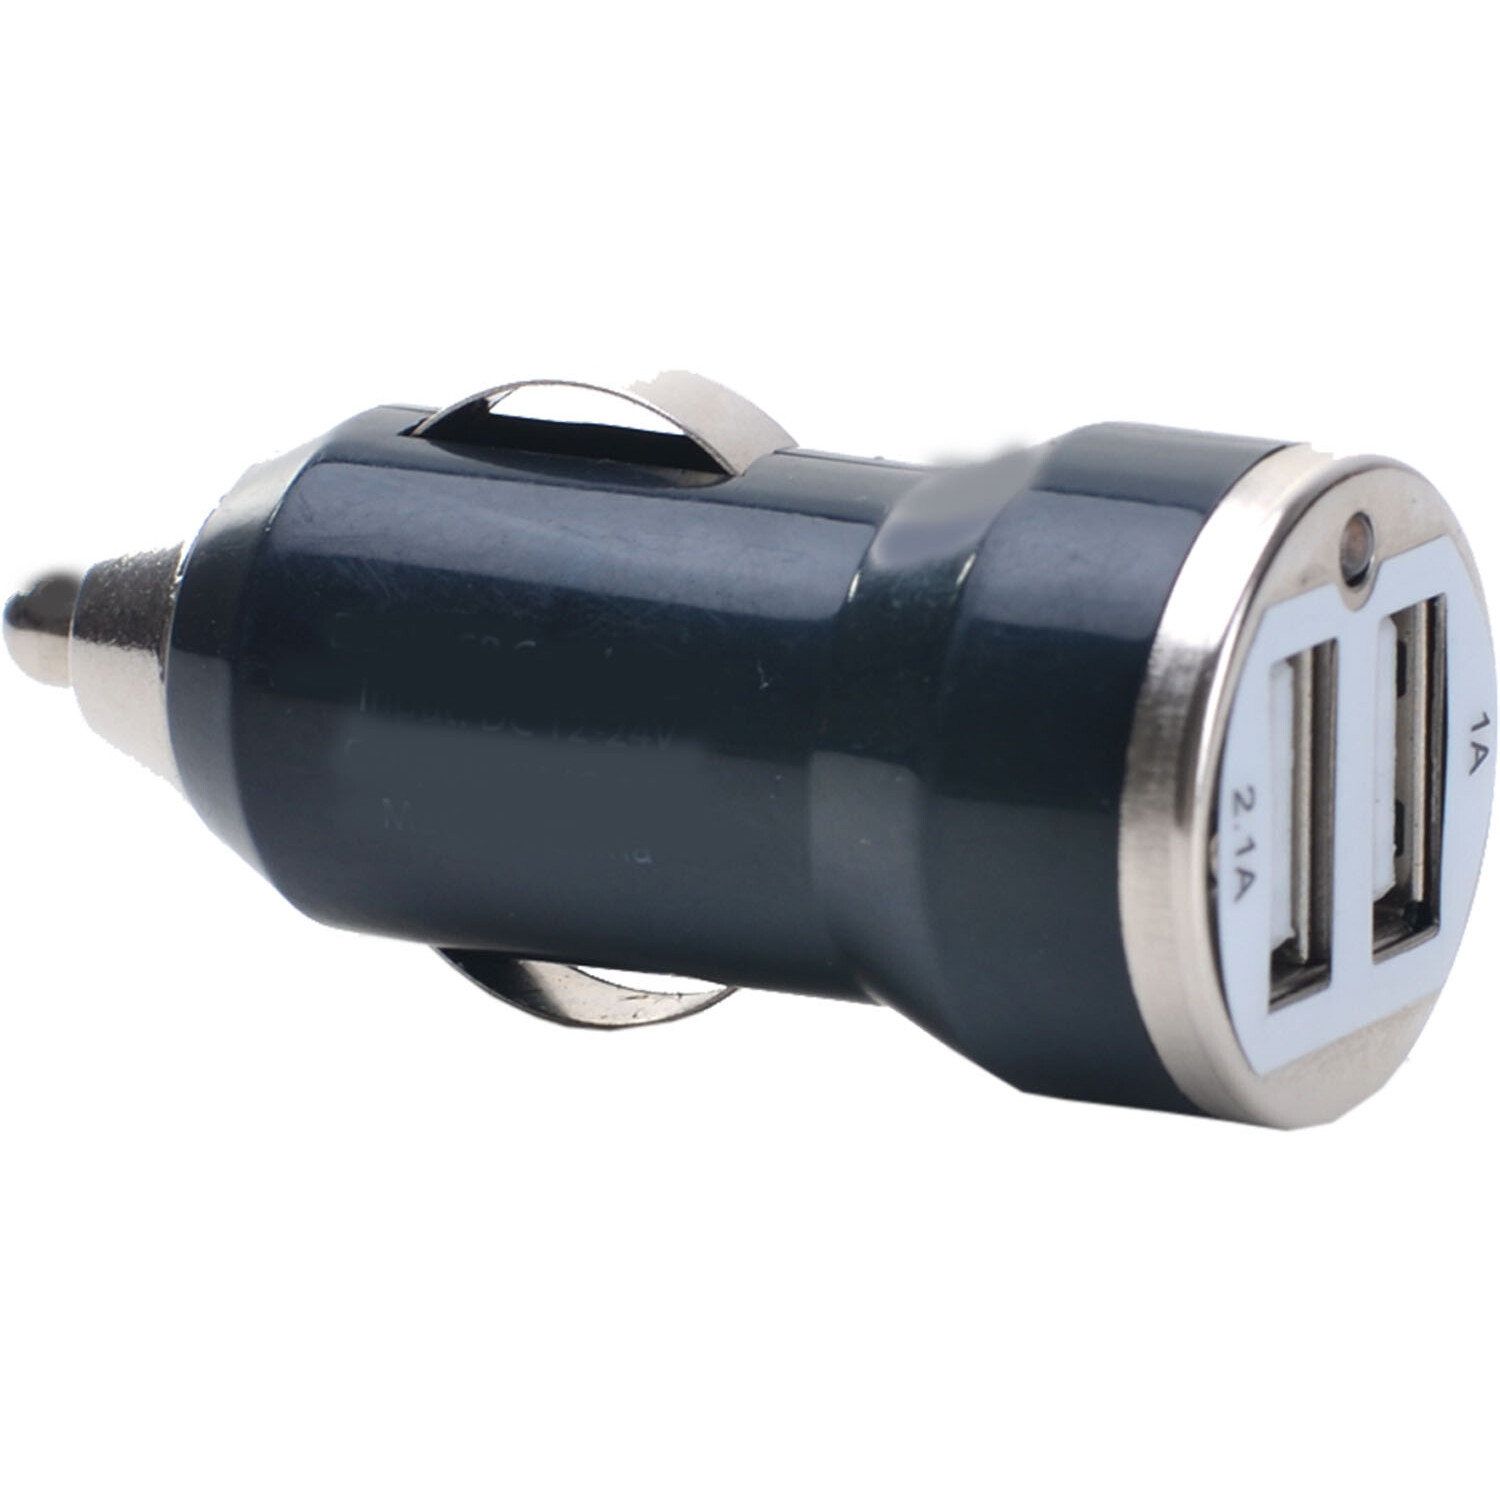 Black USB Car Charger - Double Image